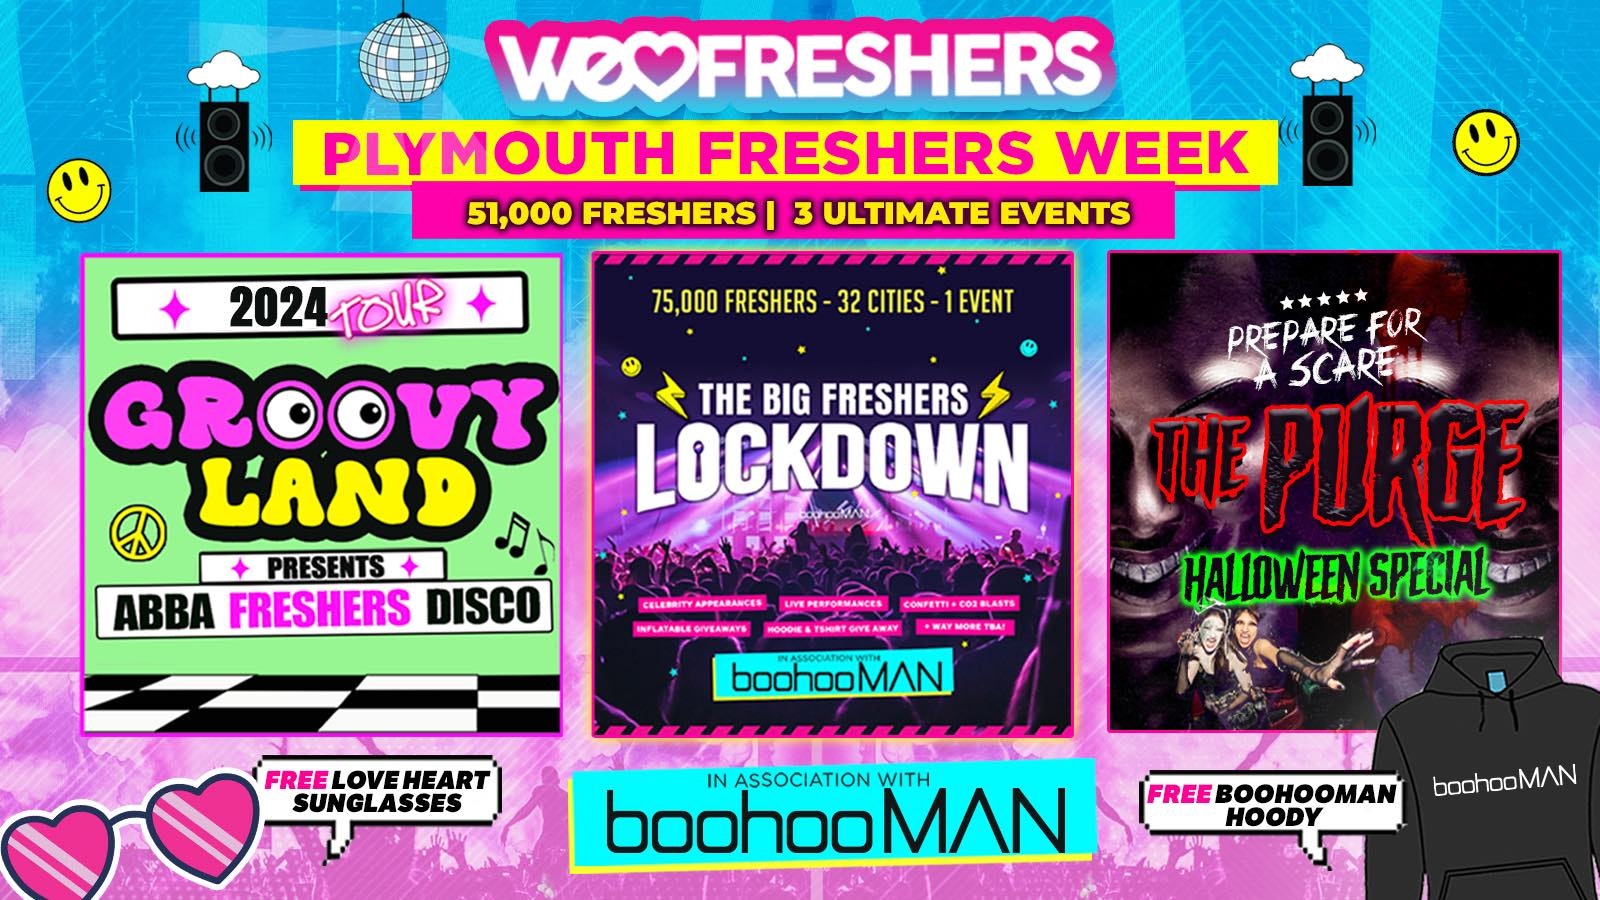 WE LOVE PLYMOUTH FRESHERS 2024 in association with boohooMAN – 3 EVENTS❗